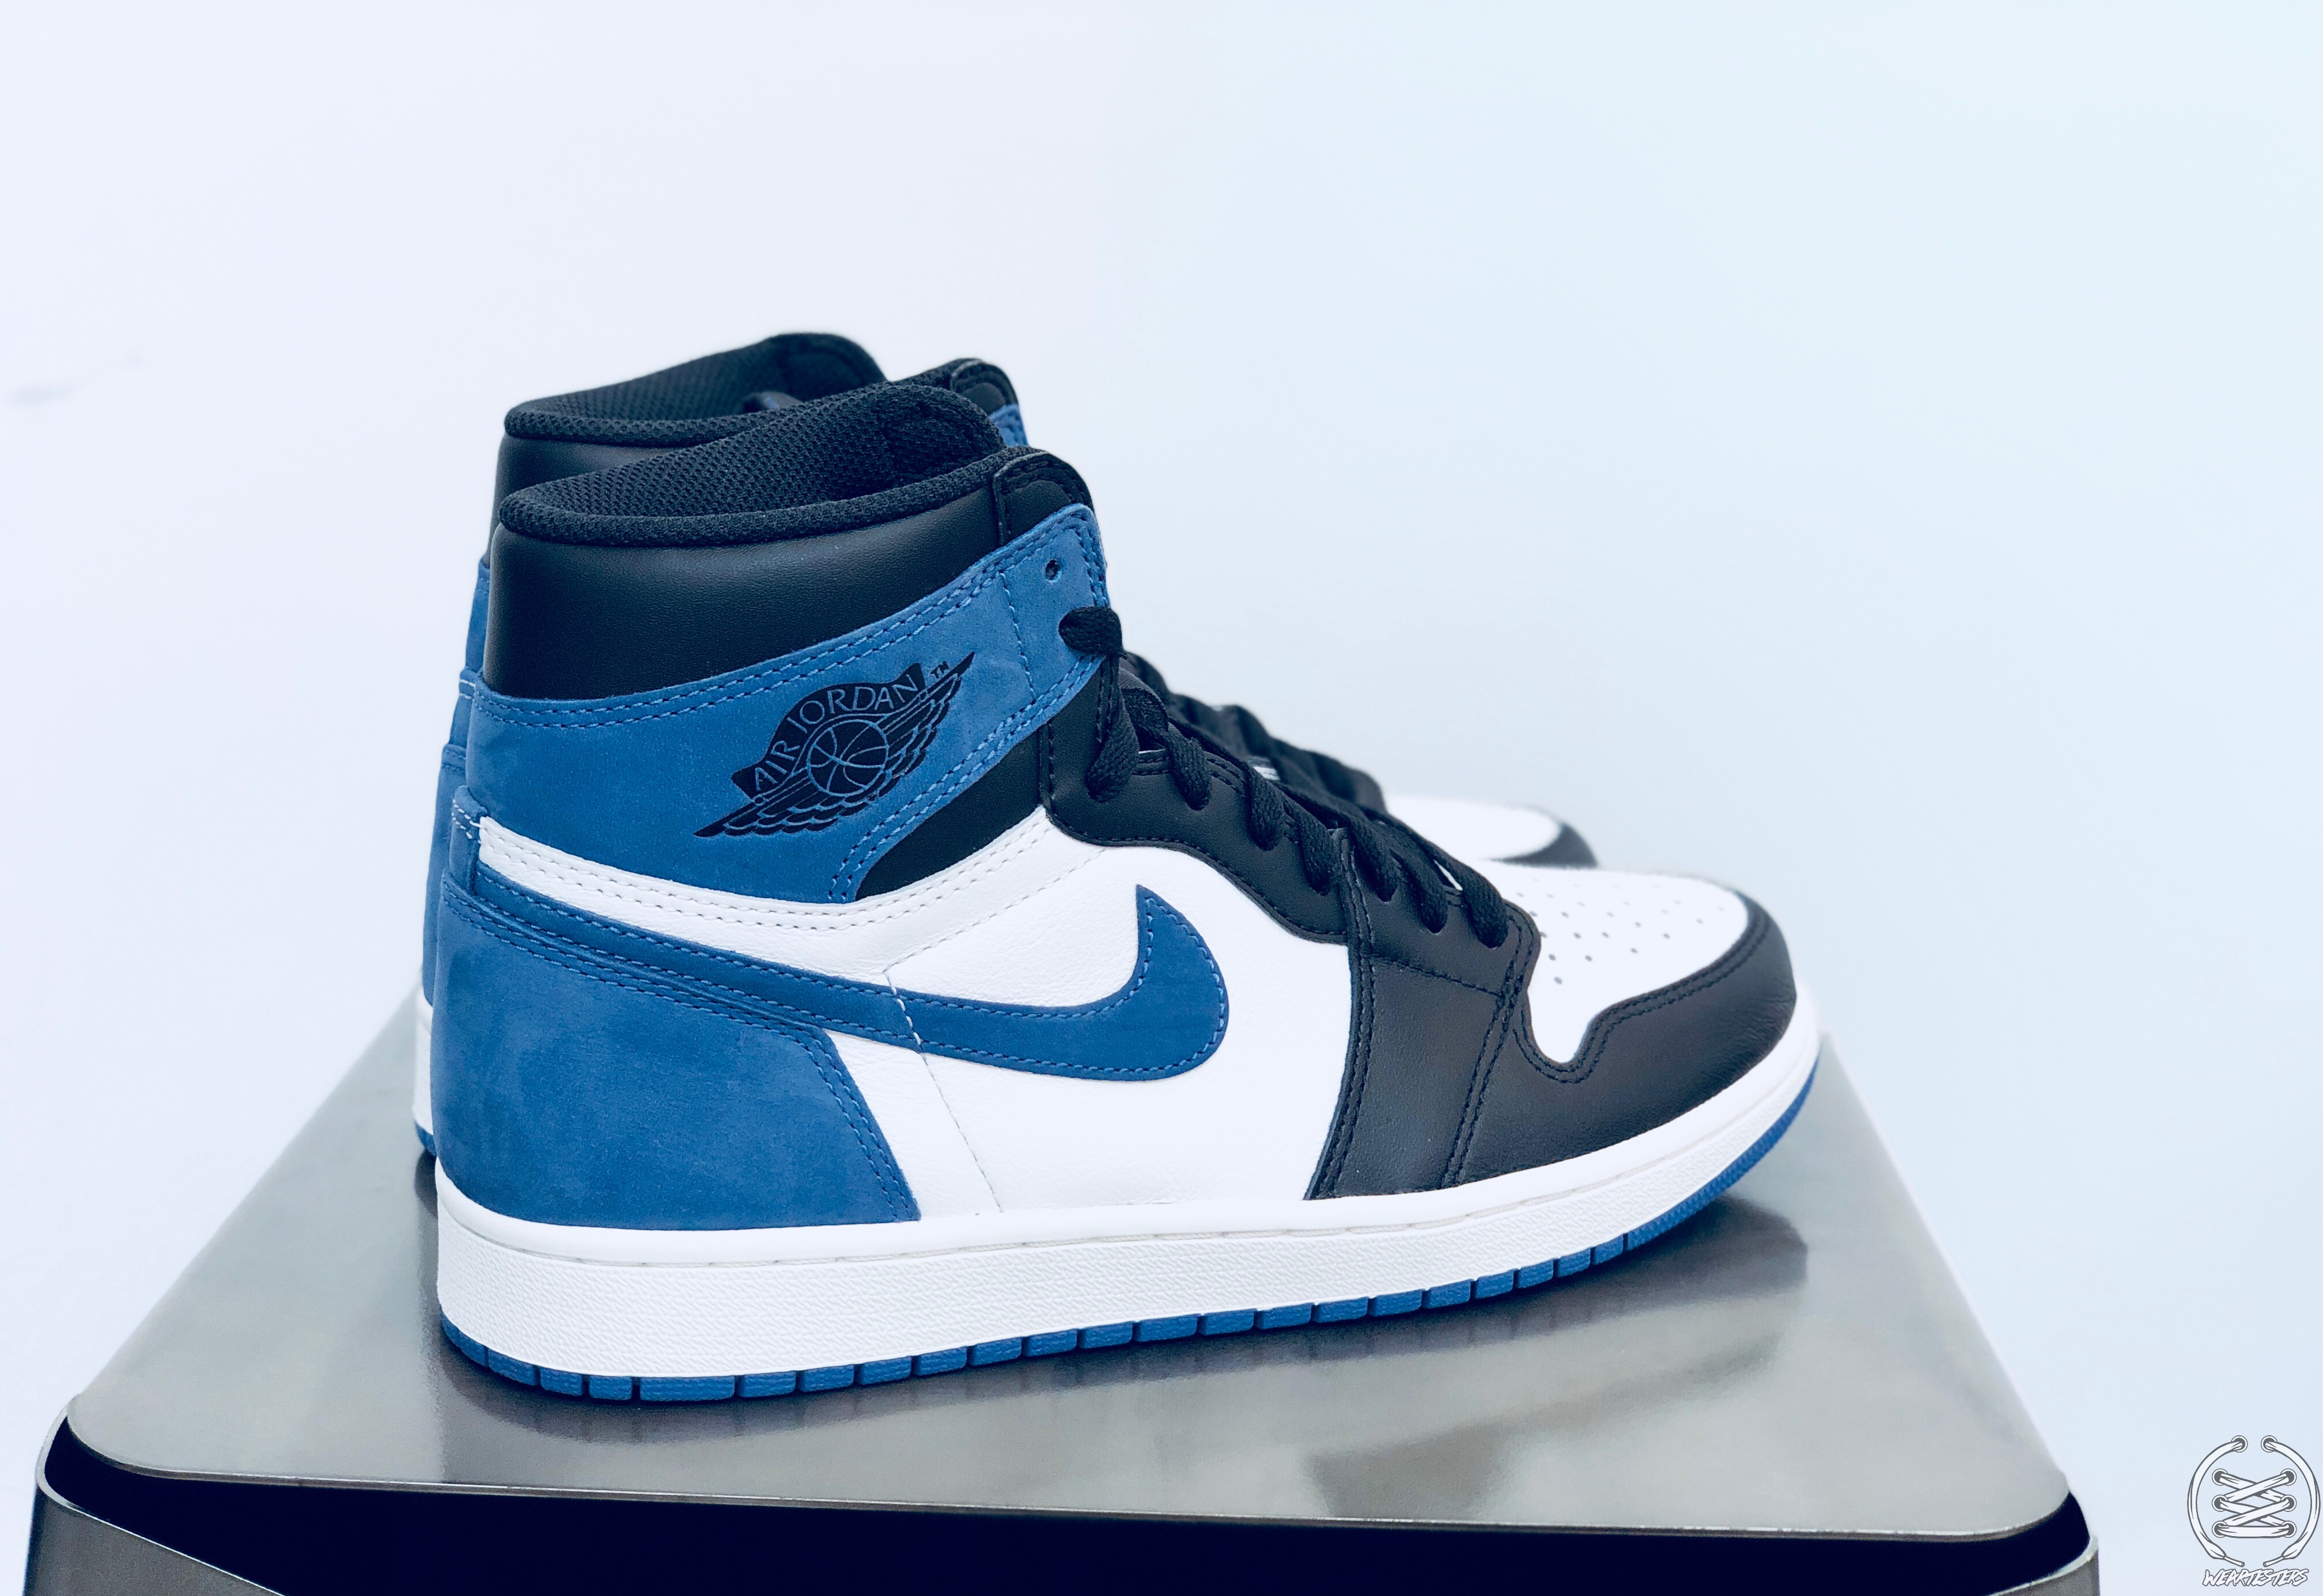 Air Jordan 1 Blue Moon Best Hand in the Game collection